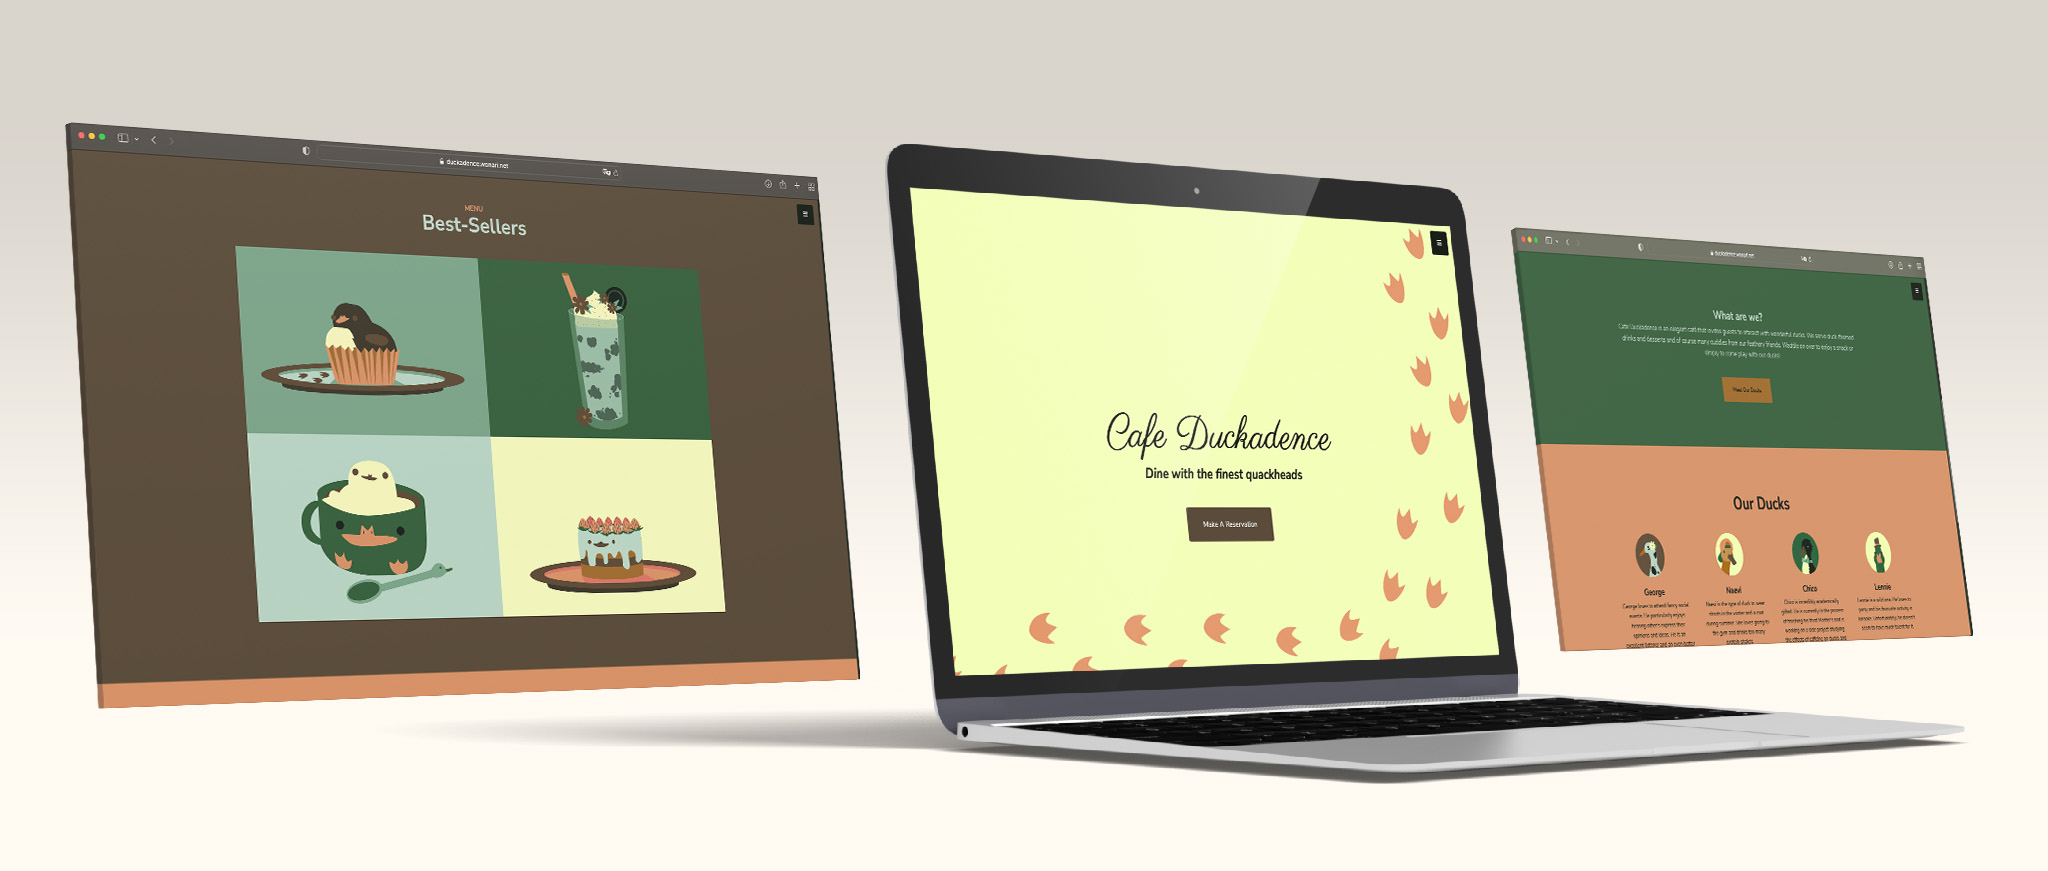 Mockup of laptops with the Cafe Duckadence website on them